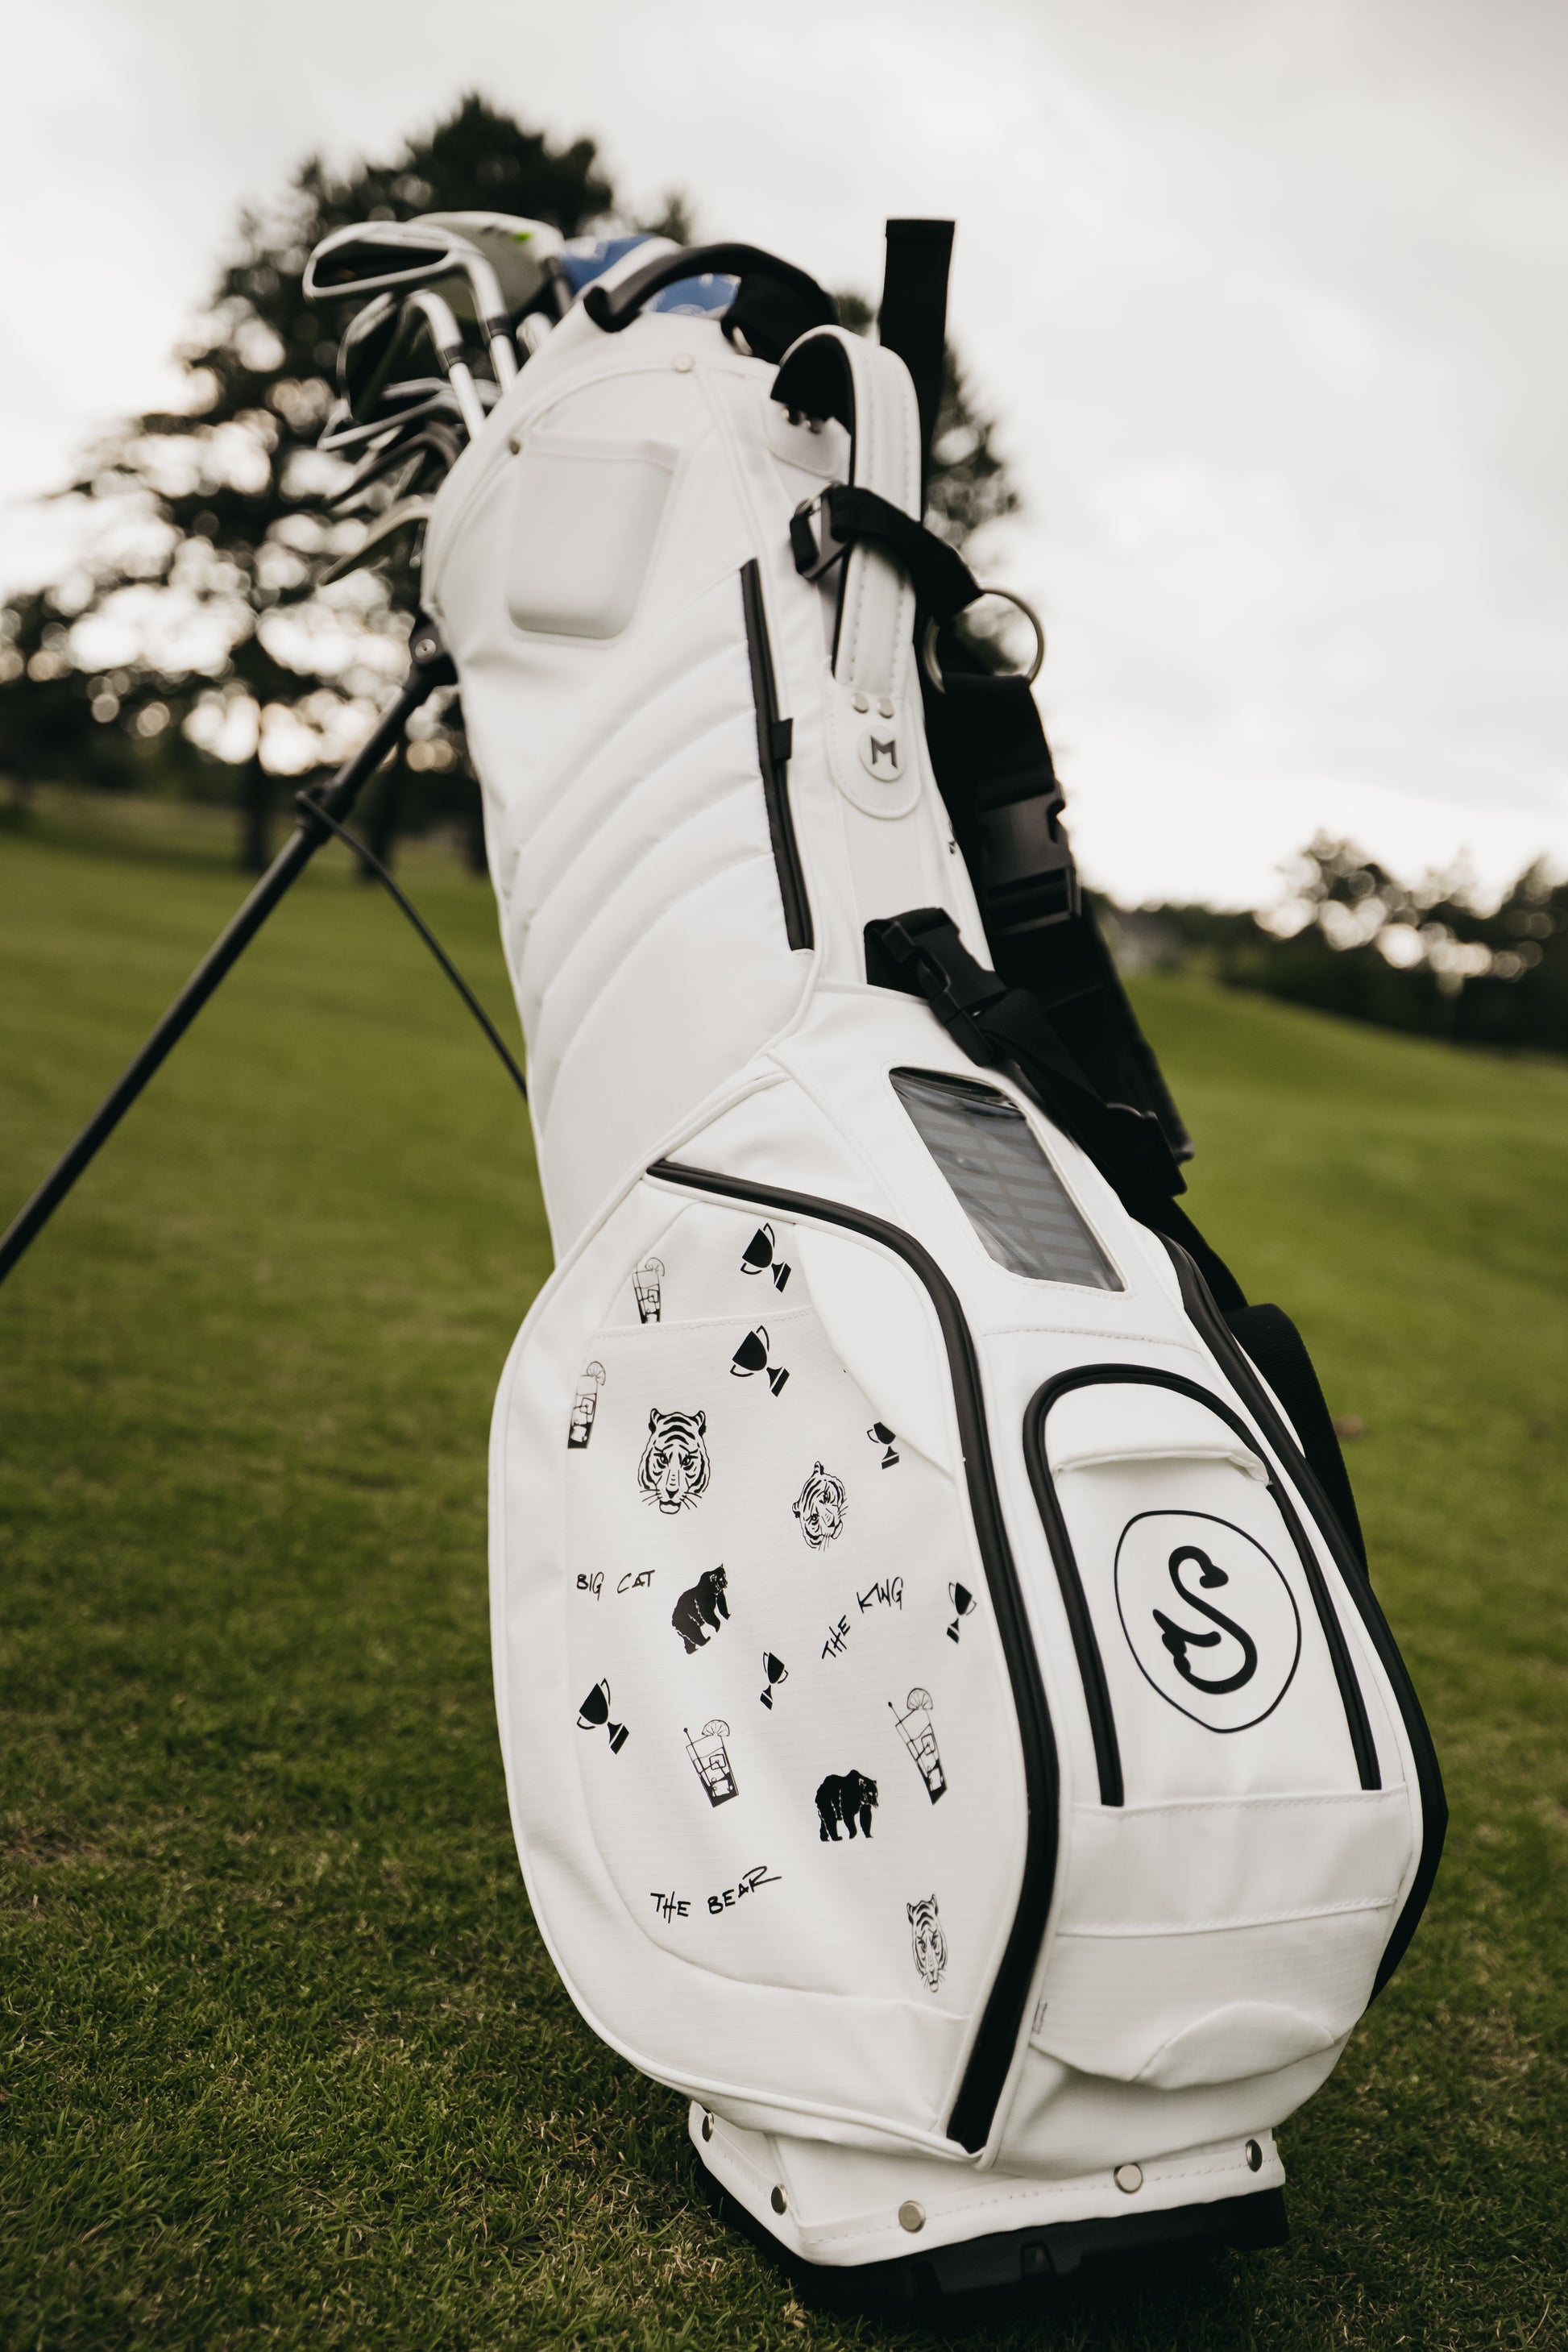 MNML GOLF's collaboration with Swannies features contrasting hand painted artwork on magnetic pockets.